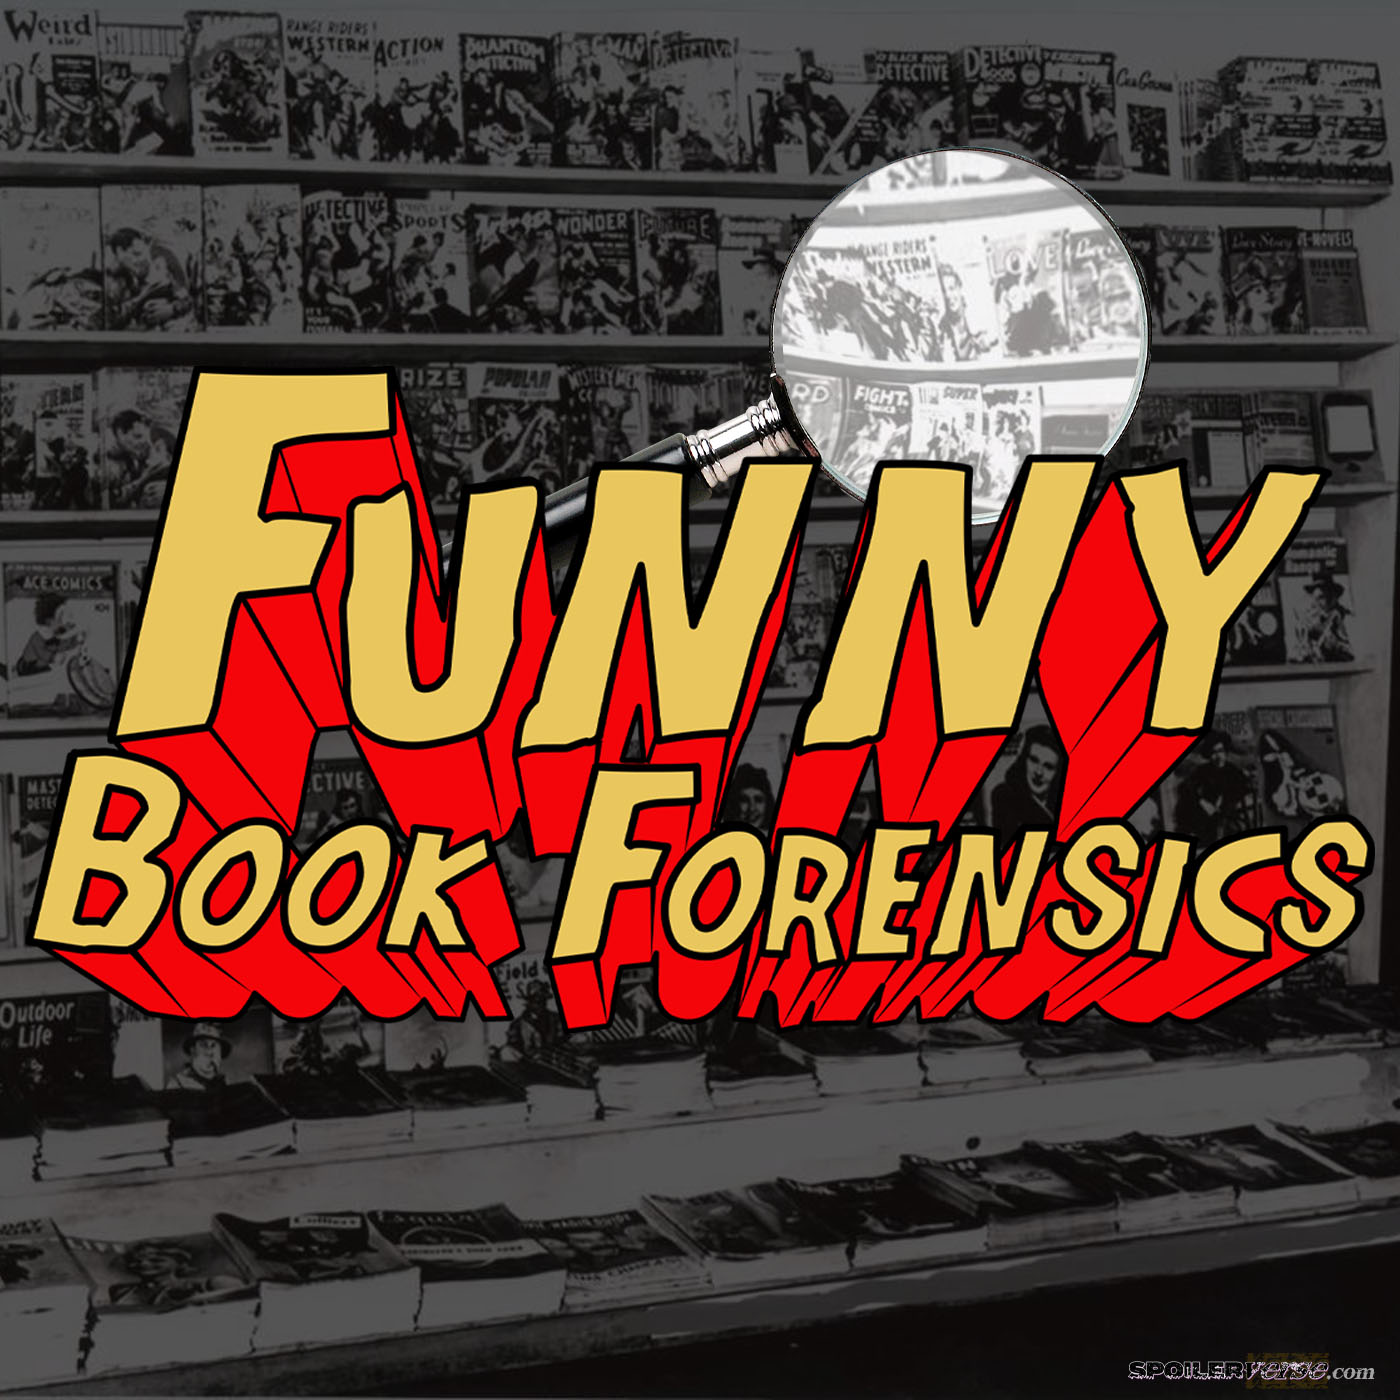 Funny Book Forensics 363 We wanted this! We Got!?